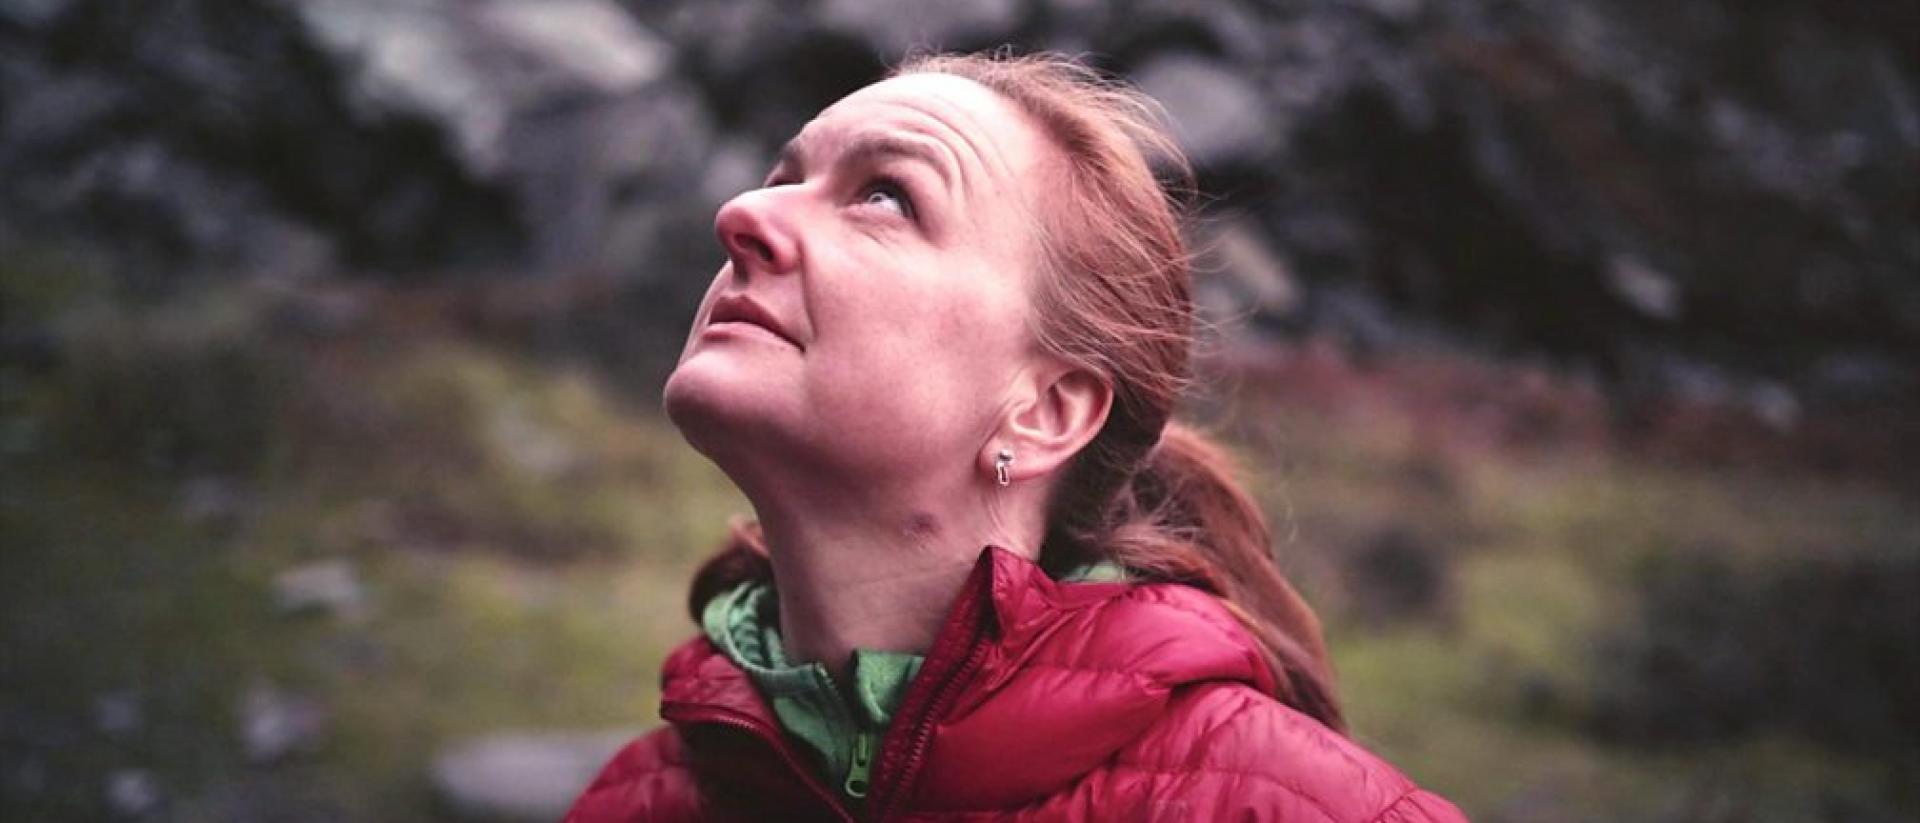 Still from Echdoe featuring a person wearing a red coat looking up. There is a rocky mountainside behind them.